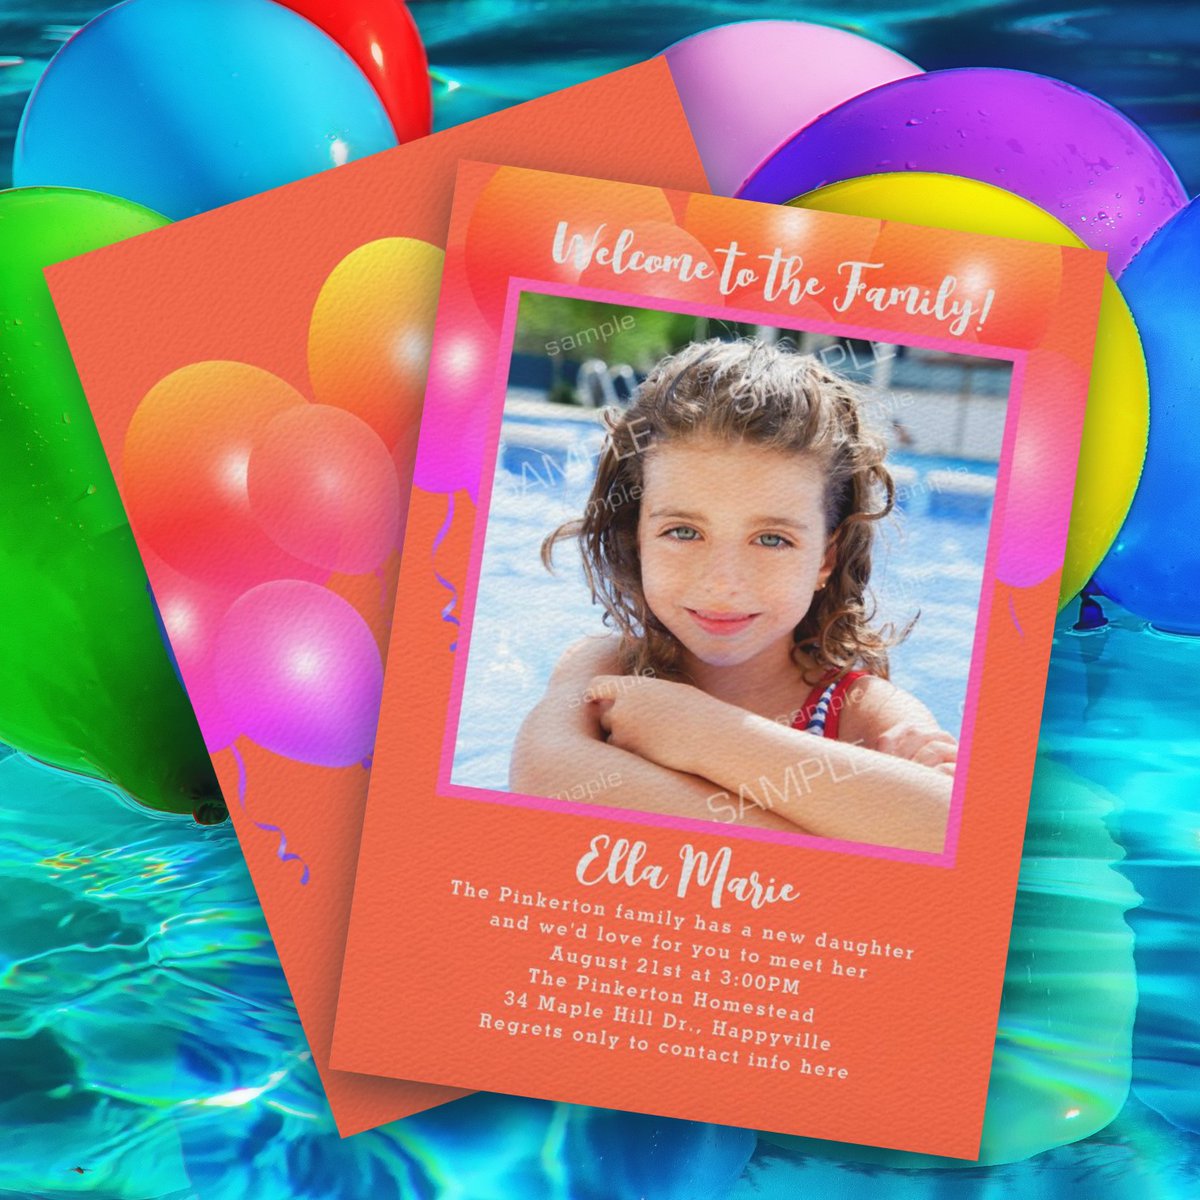 Happy balloons adoption party invites - Welcome a child to the family. Create photo cards with custom wording in bright summer colors. #daughteradoption #adoptionparty zazzle.com/adoption_party… via @zazzle #zazzlemade